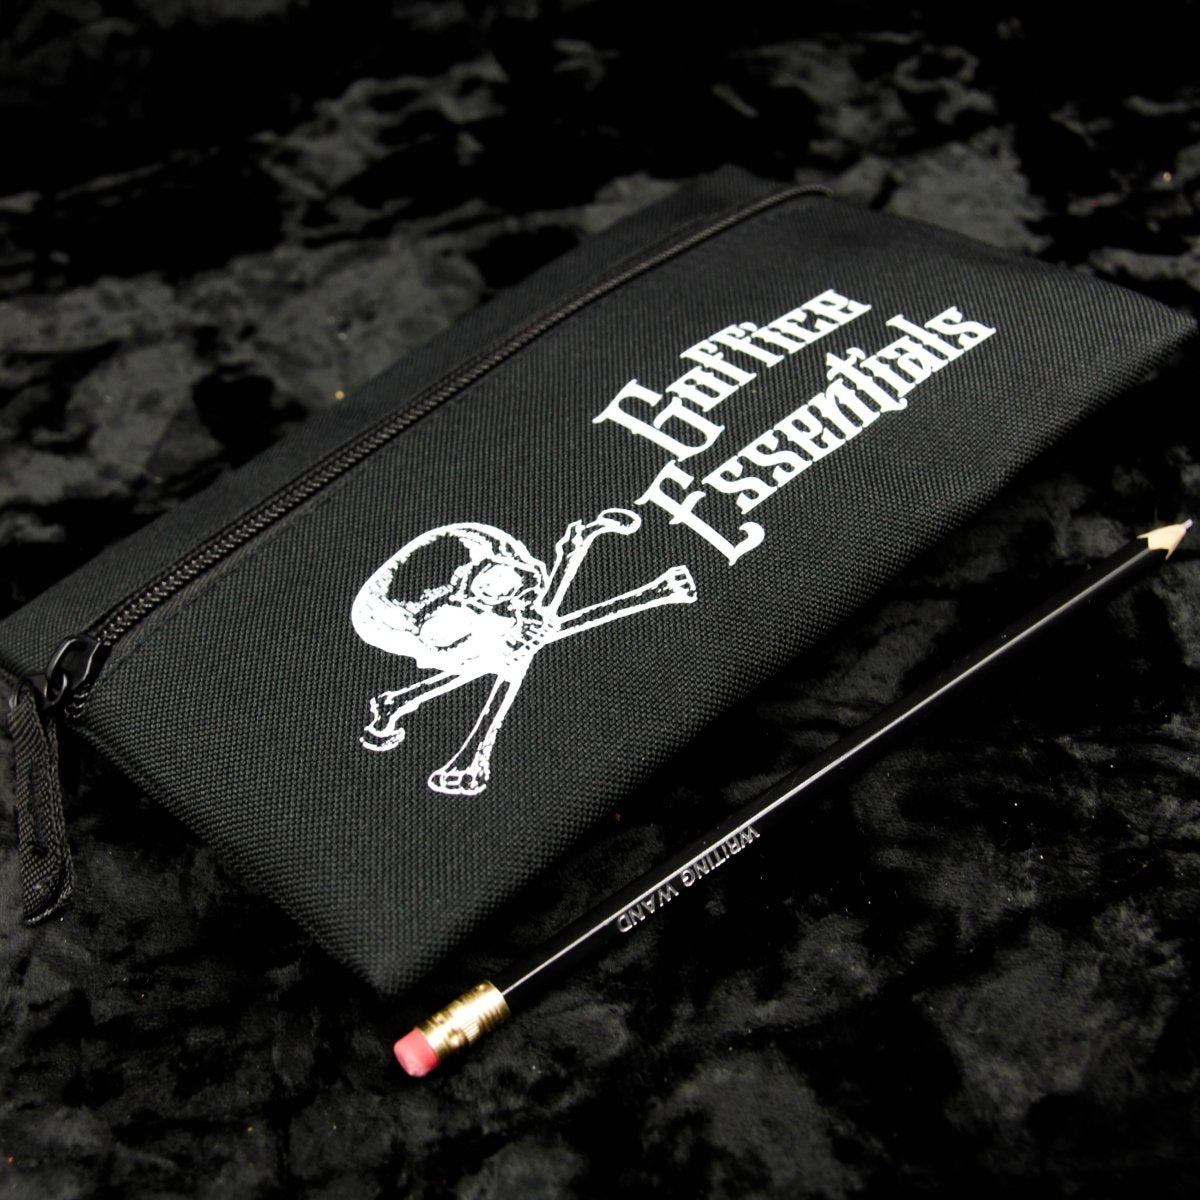 Gothic Skull Pencil Case | Goffice Essentials - The Gothic Stationery Company - Pencil Case